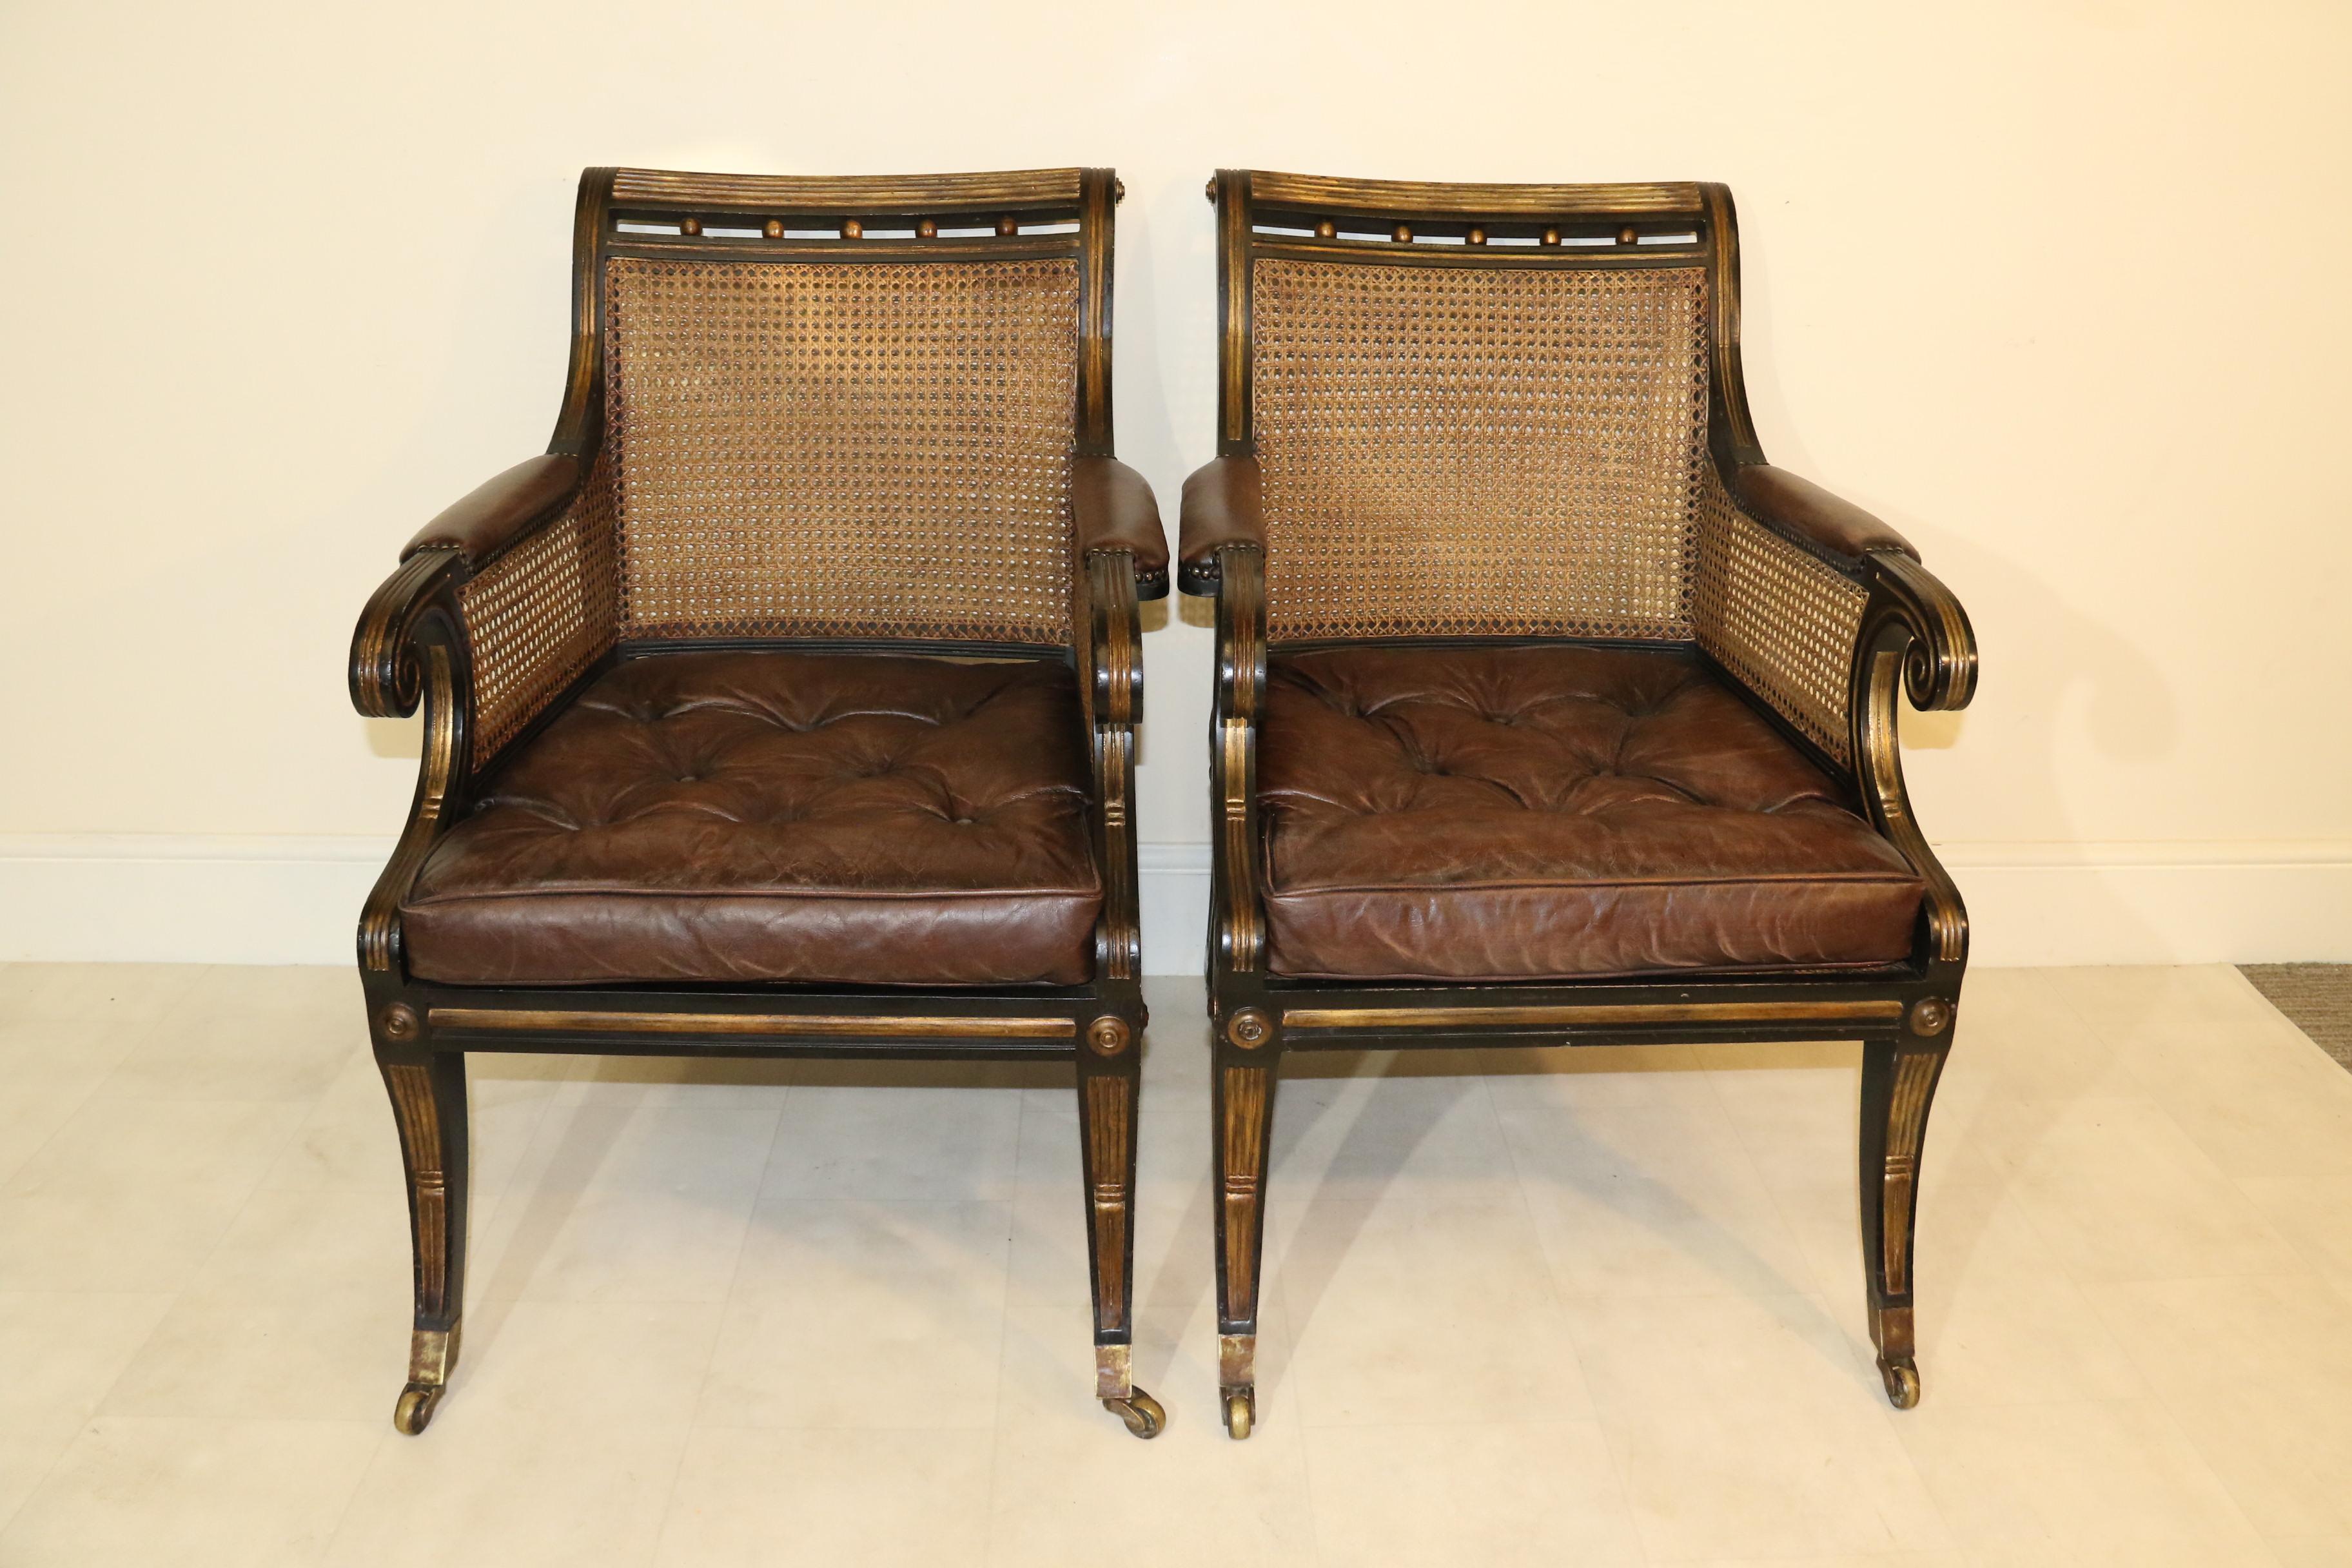 Pair of English Regency Style Ebonized and Gilt Library Chairs For Sale 2